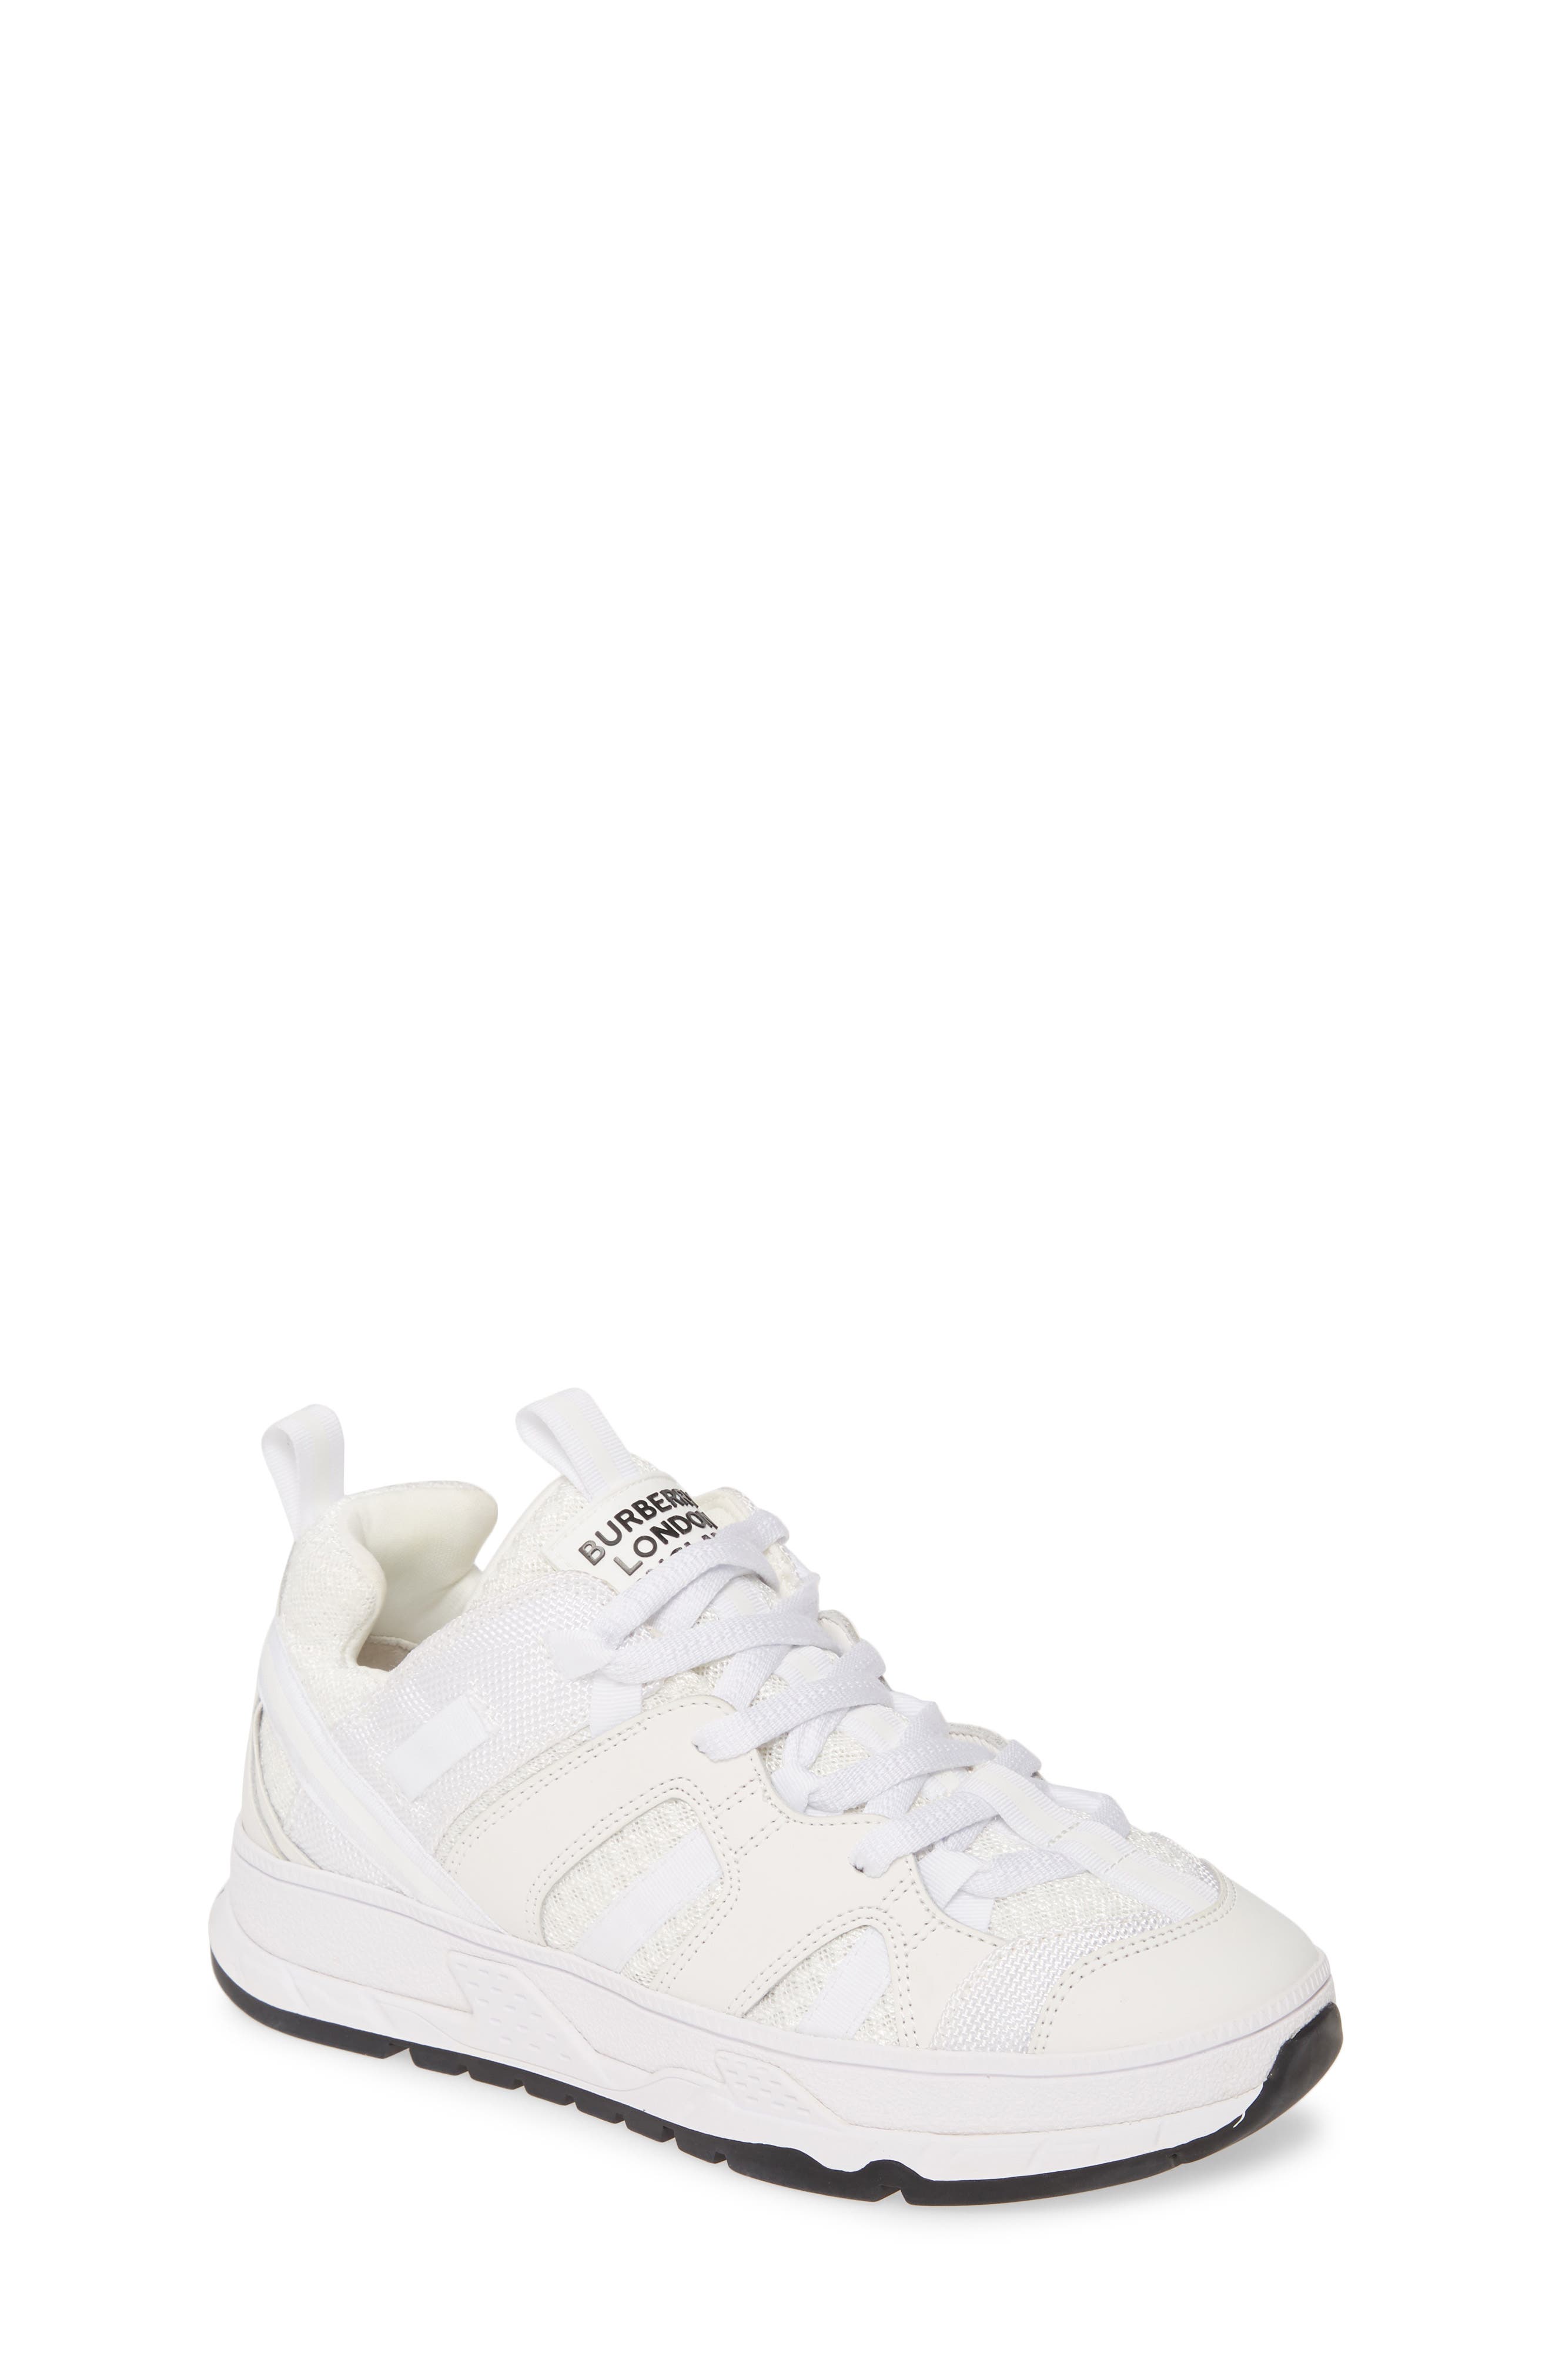 burberry toddler sneakers